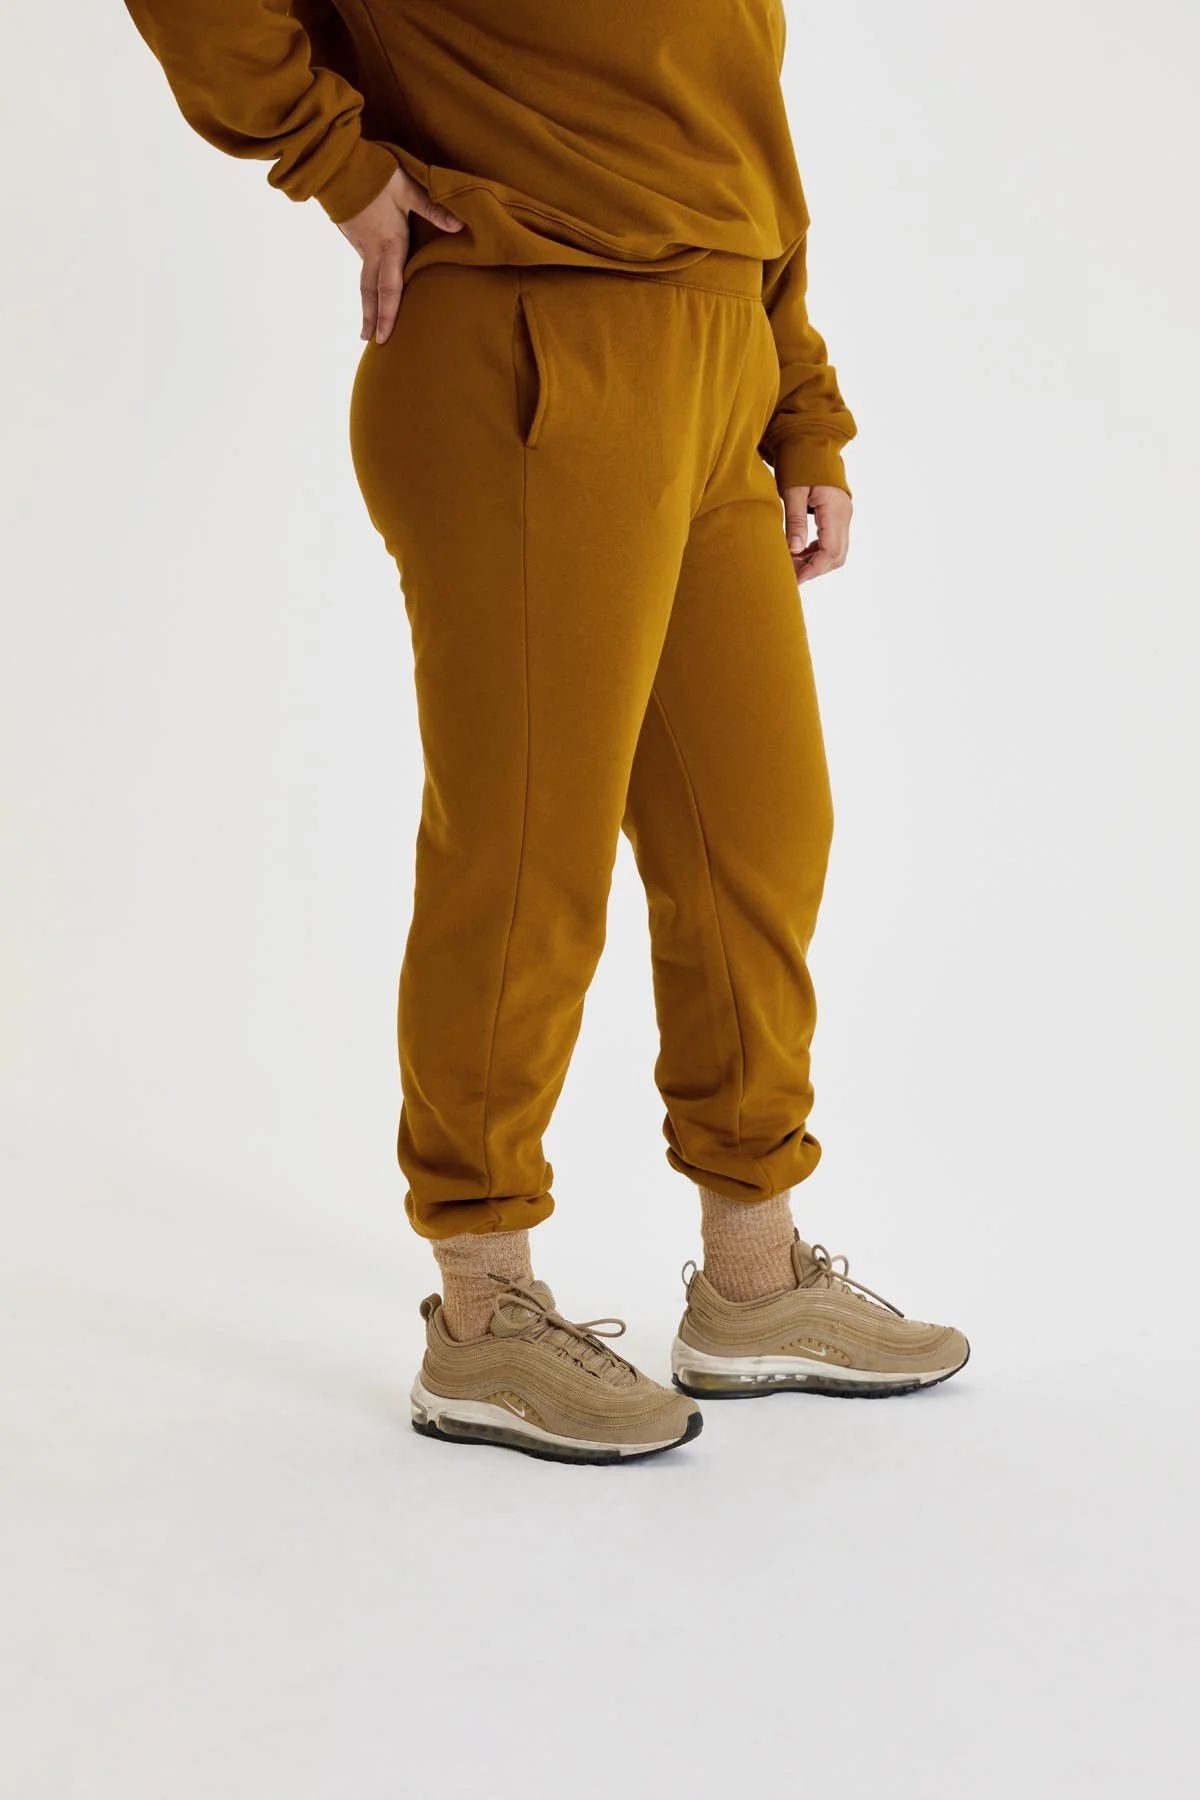 Sycamore 50/50 Classic Jogger | Girlfriend Collective